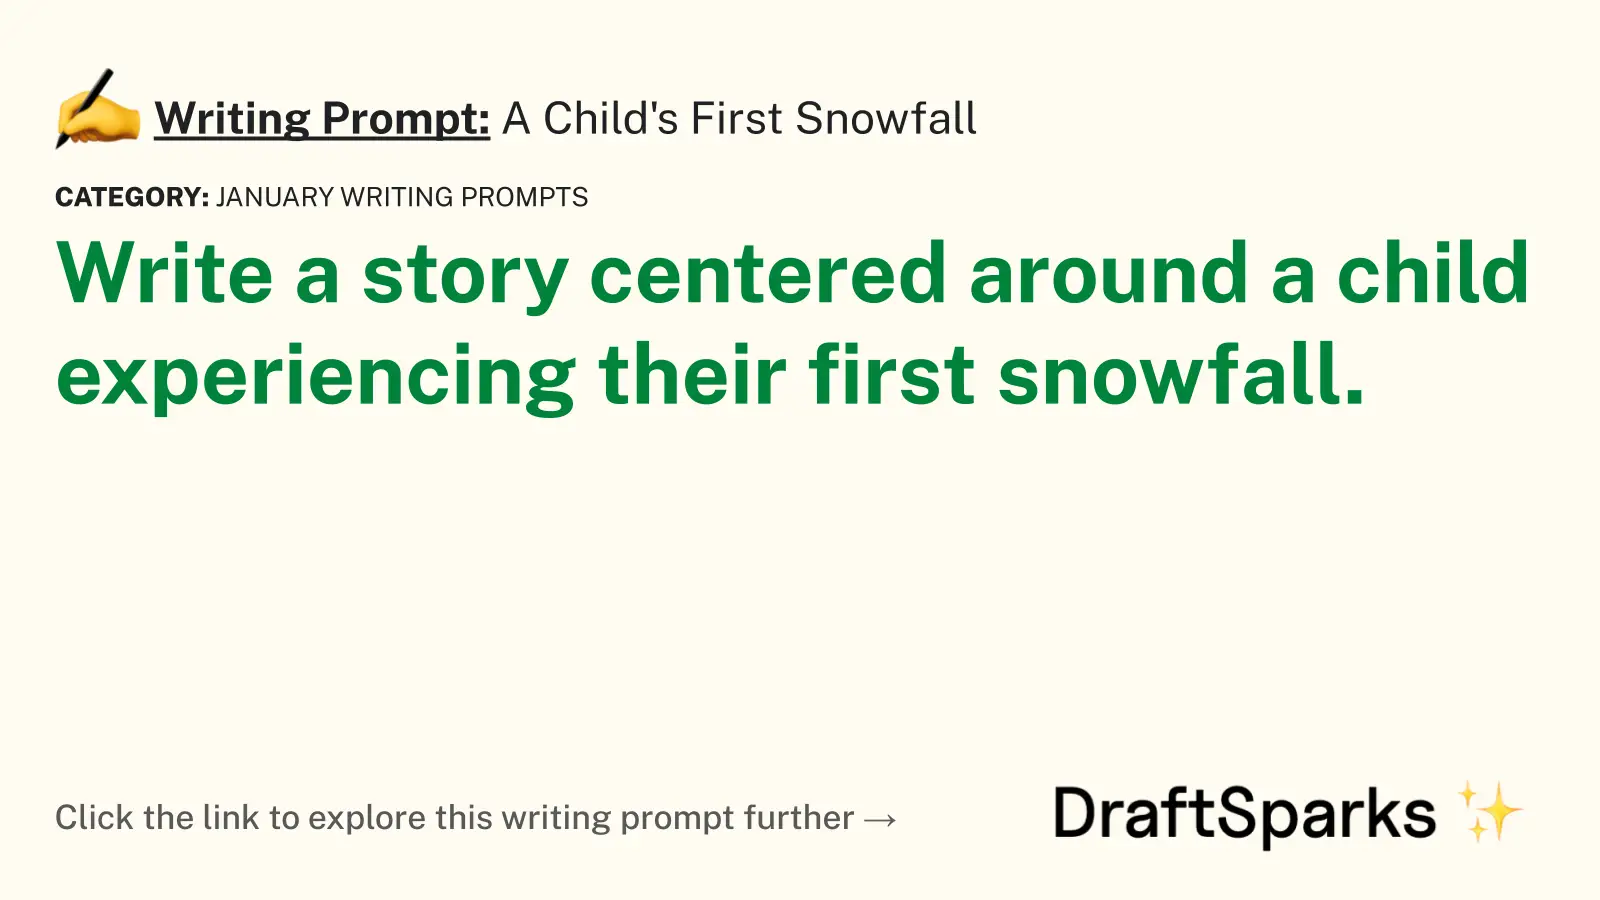 A Child’s First Snowfall